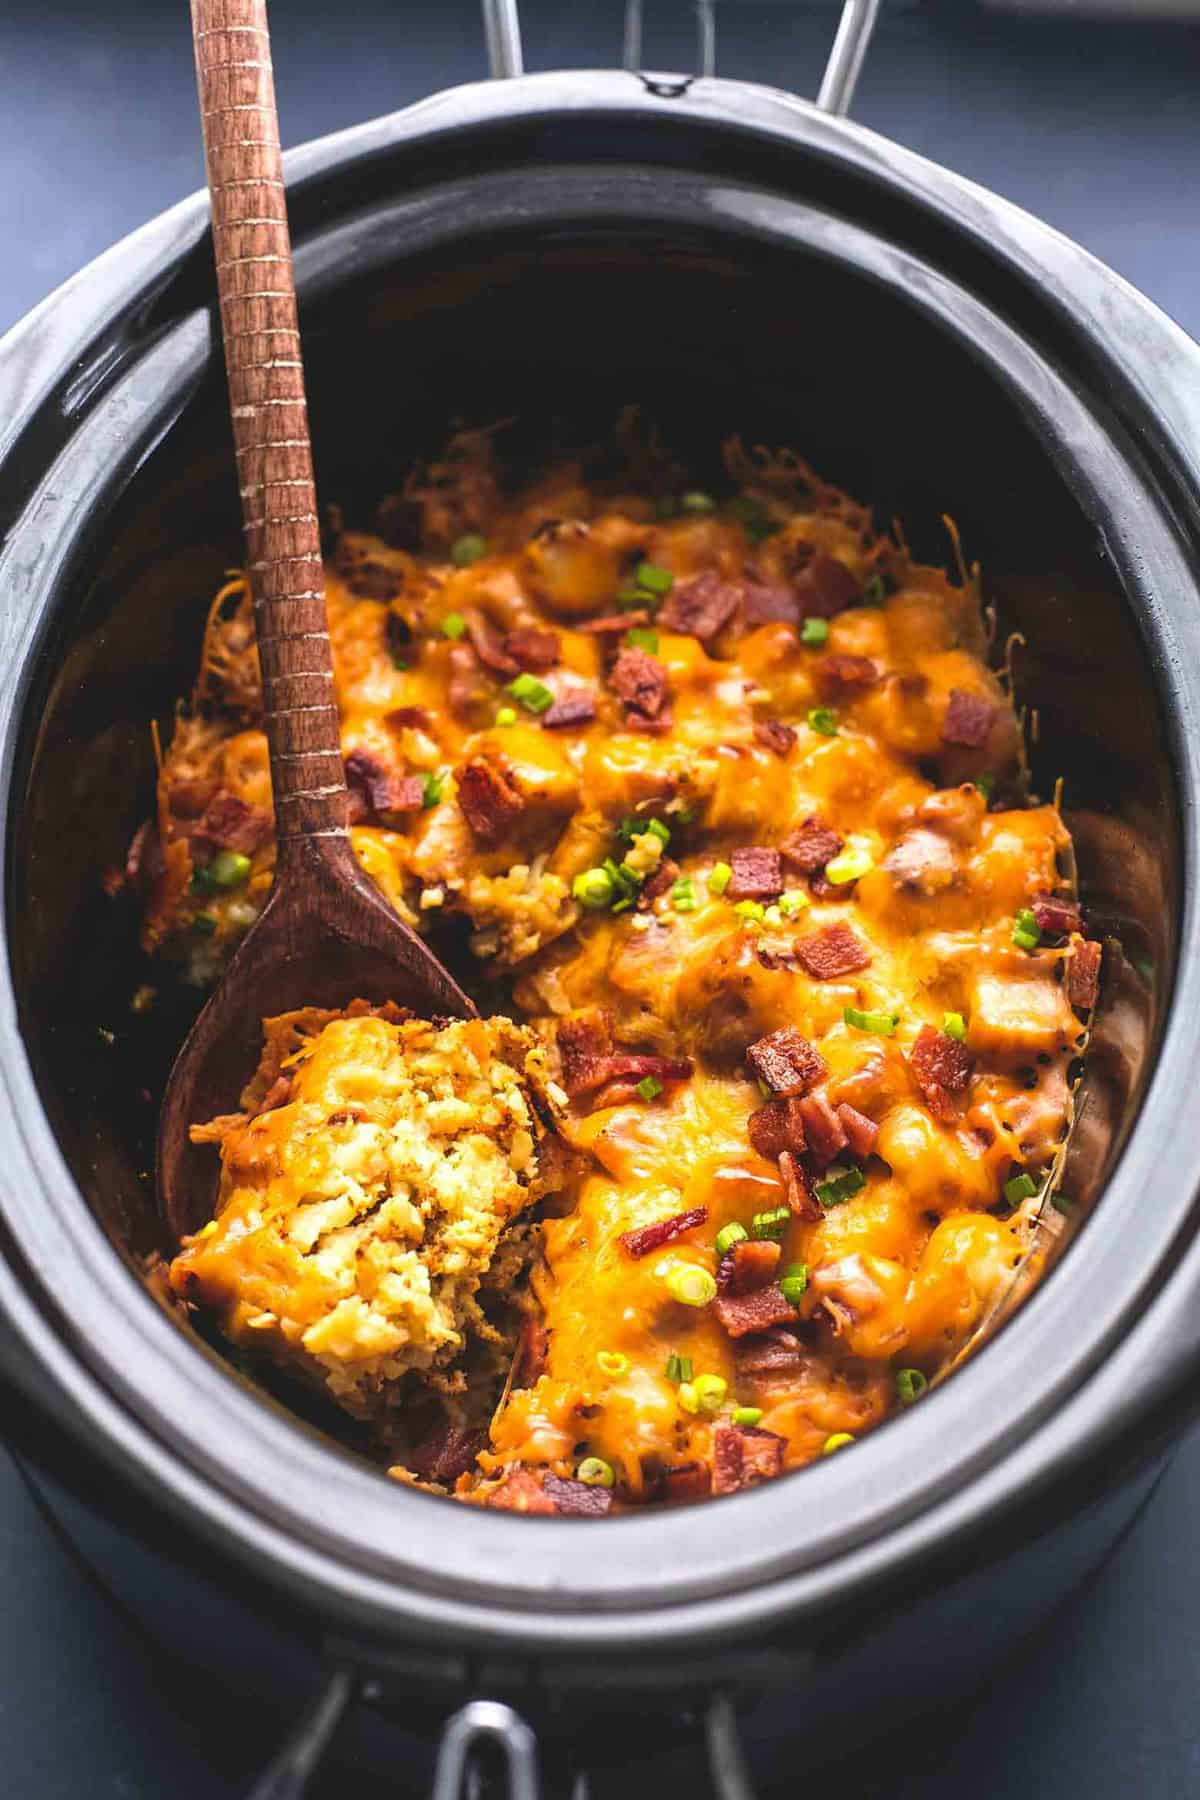 Breakfast Casserole With Tater Tots And Bacon
 Slow Cooker Loaded Tater Tot Breakfast Casserole